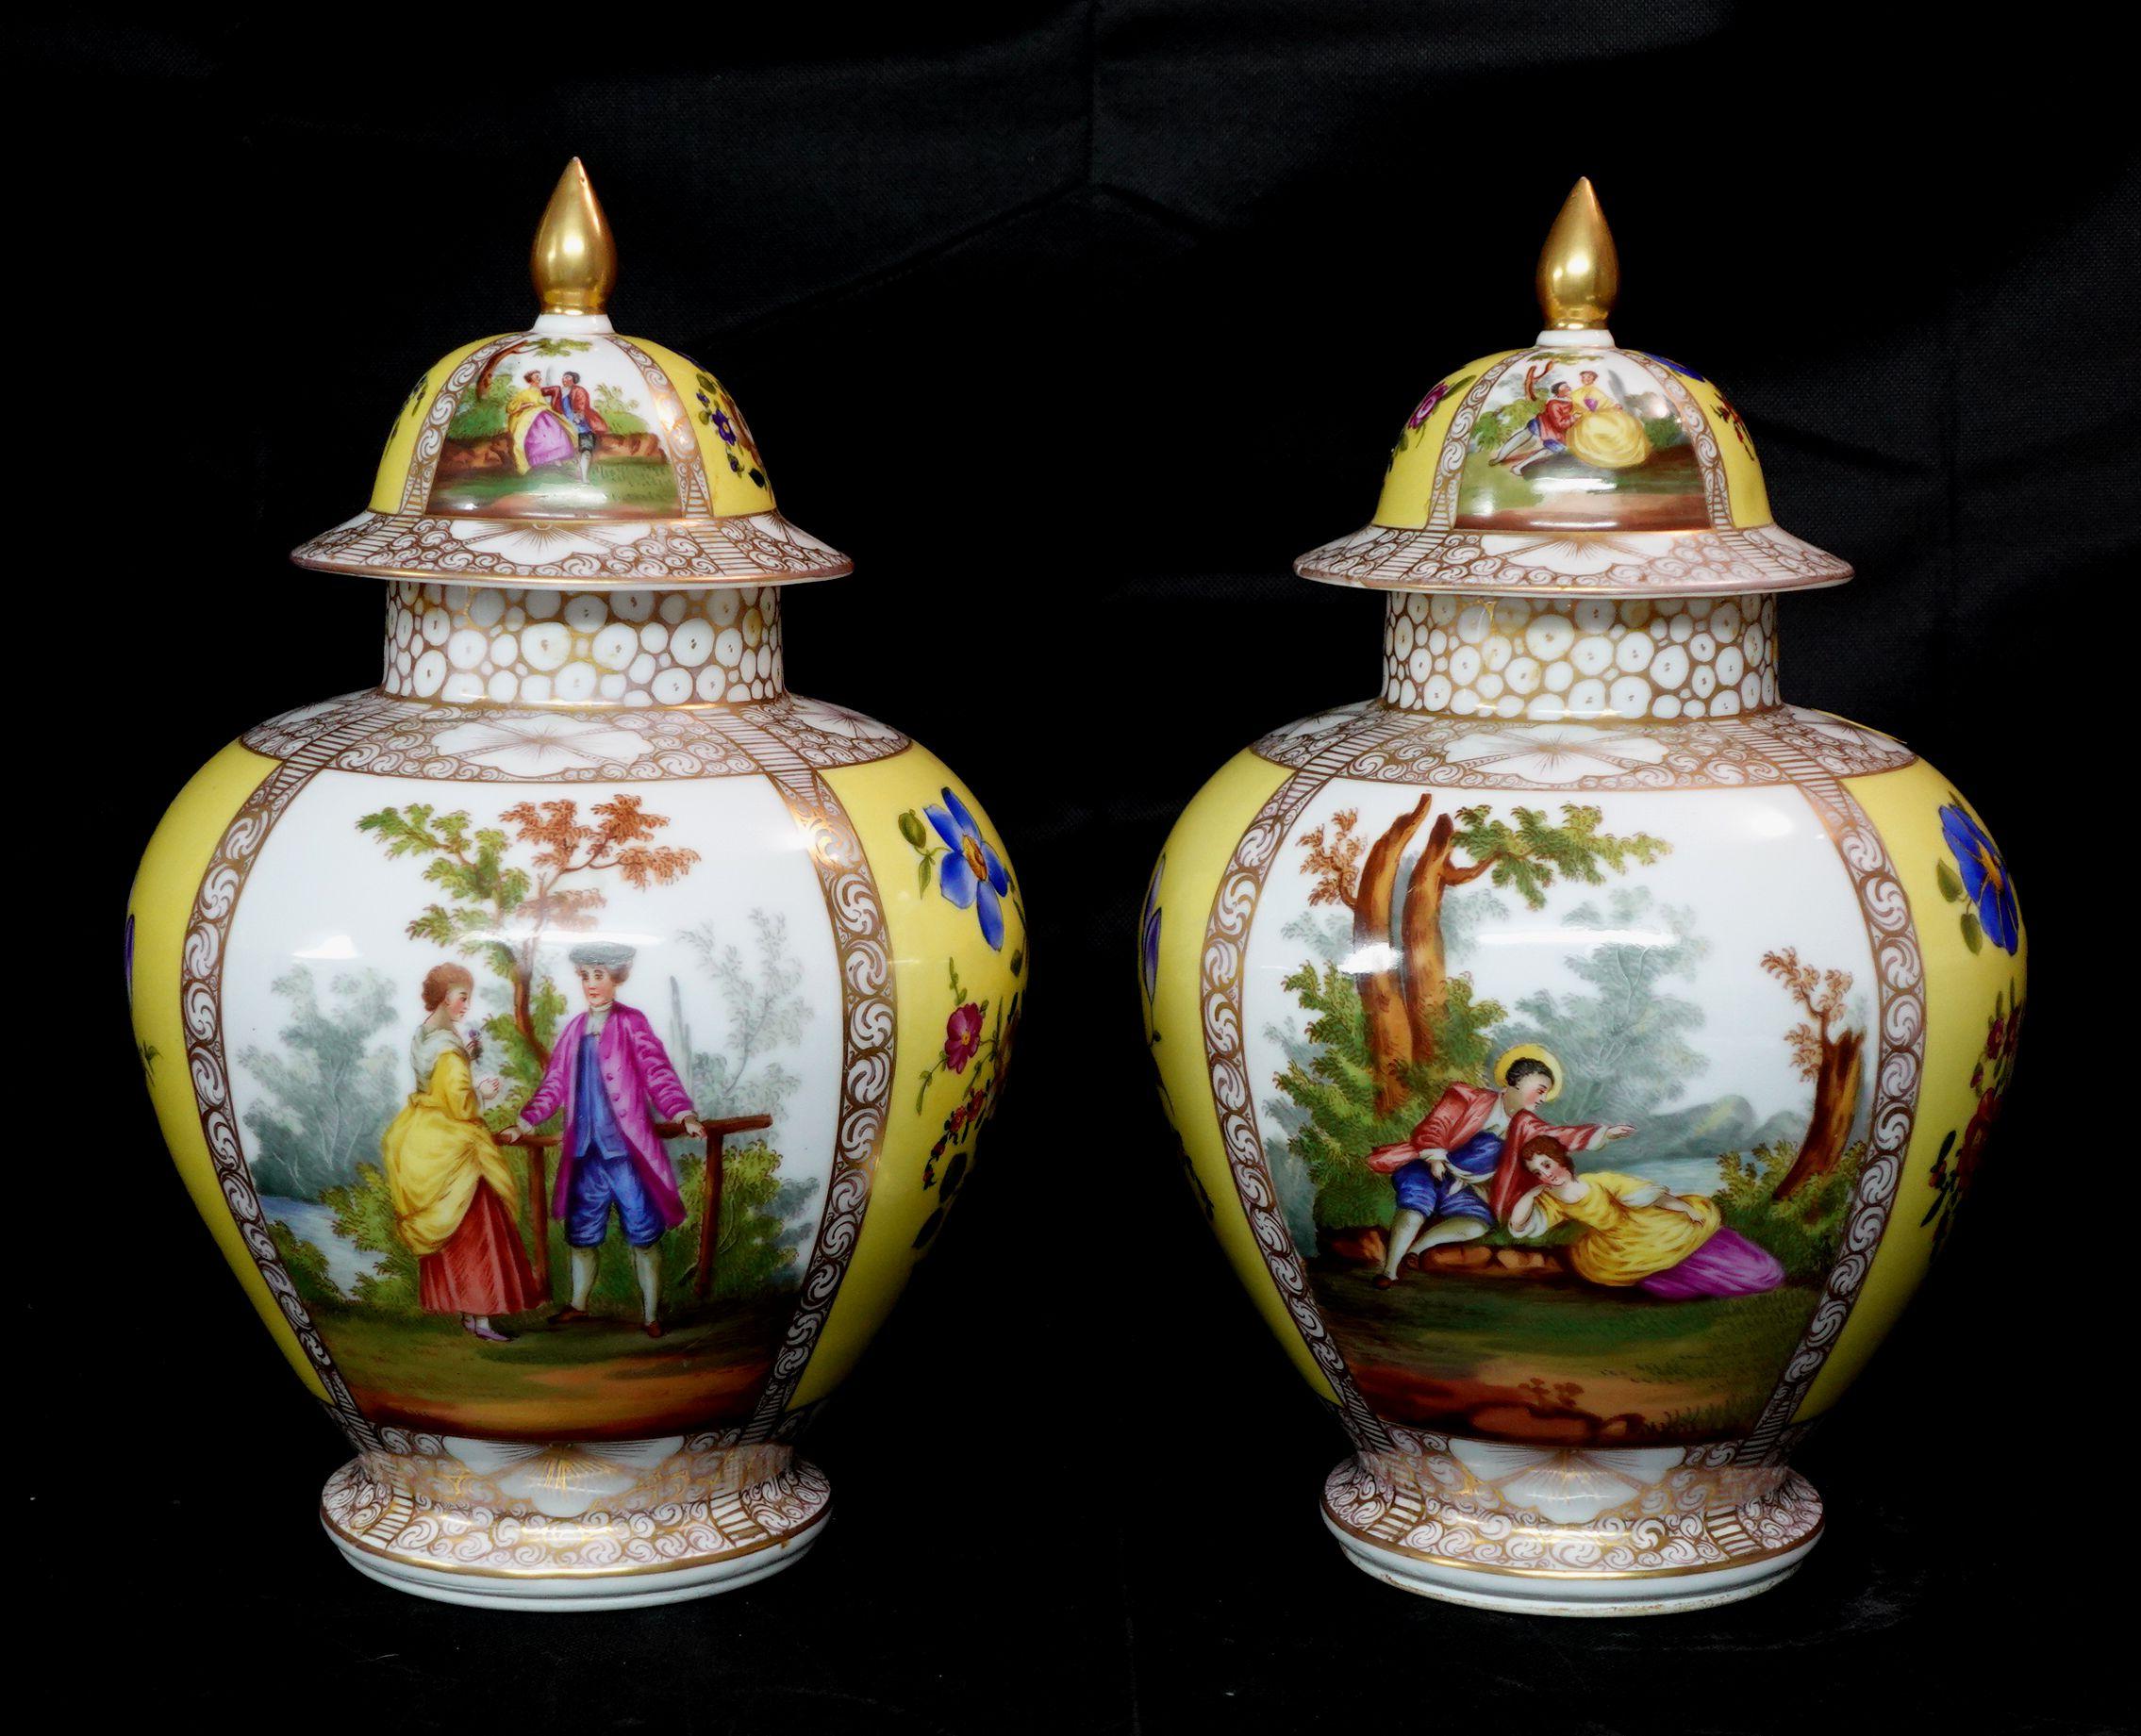 Pair of German Helena Wolfsohn style porcelain covered jars 19th century
Hand-painted covered porcelain jars, with scenes of a courting couple, bouquets of flowers, and gilt decoration, height 13, 
diameter 8 1/2 in.

 